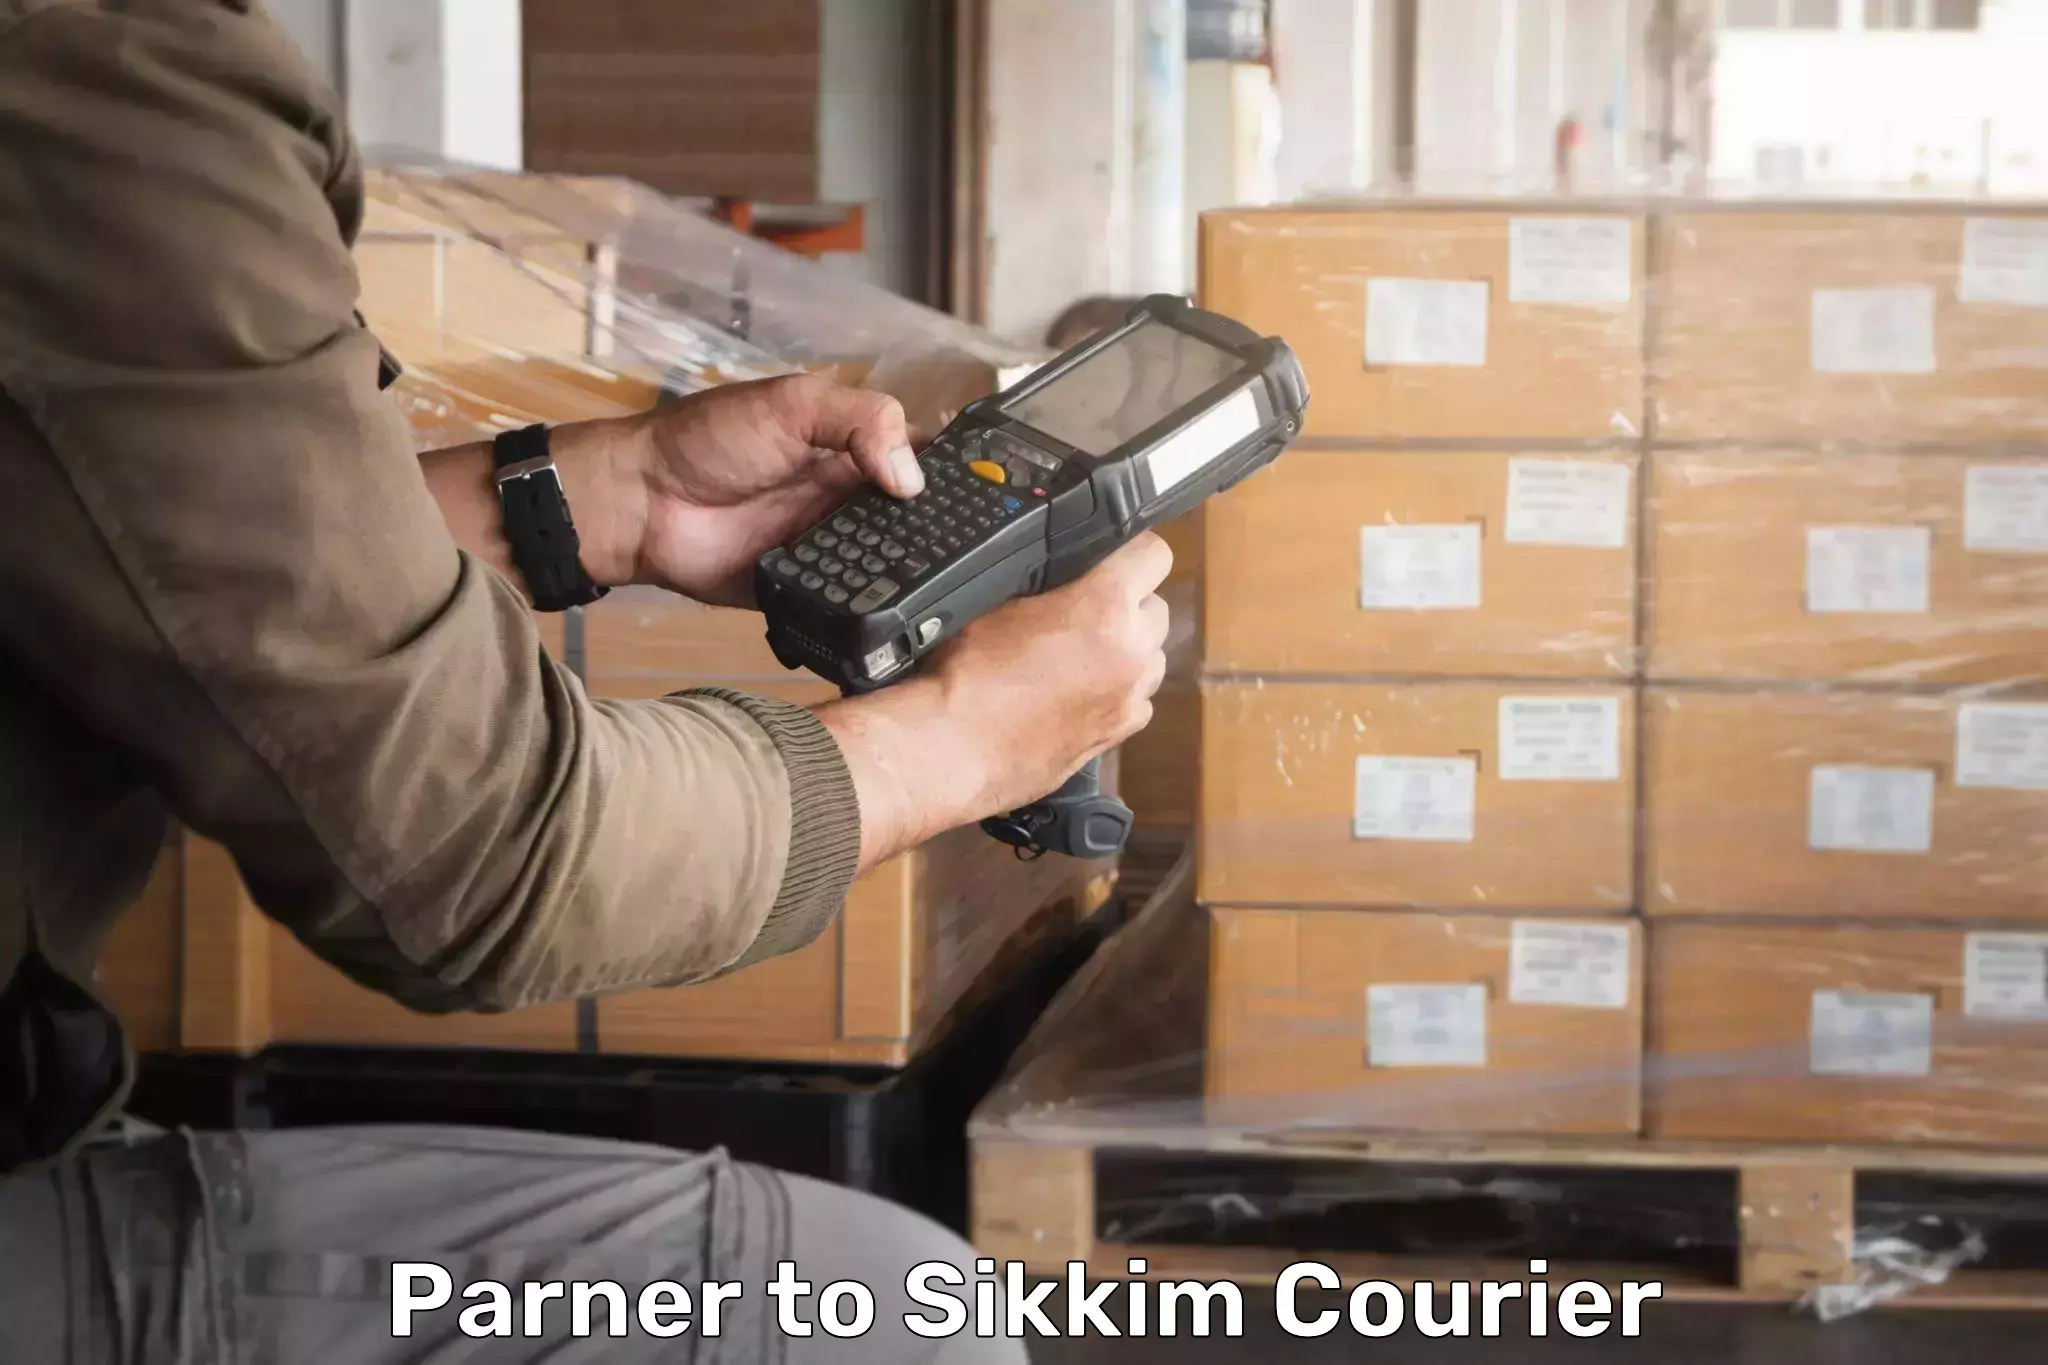 Global courier networks Parner to Sikkim